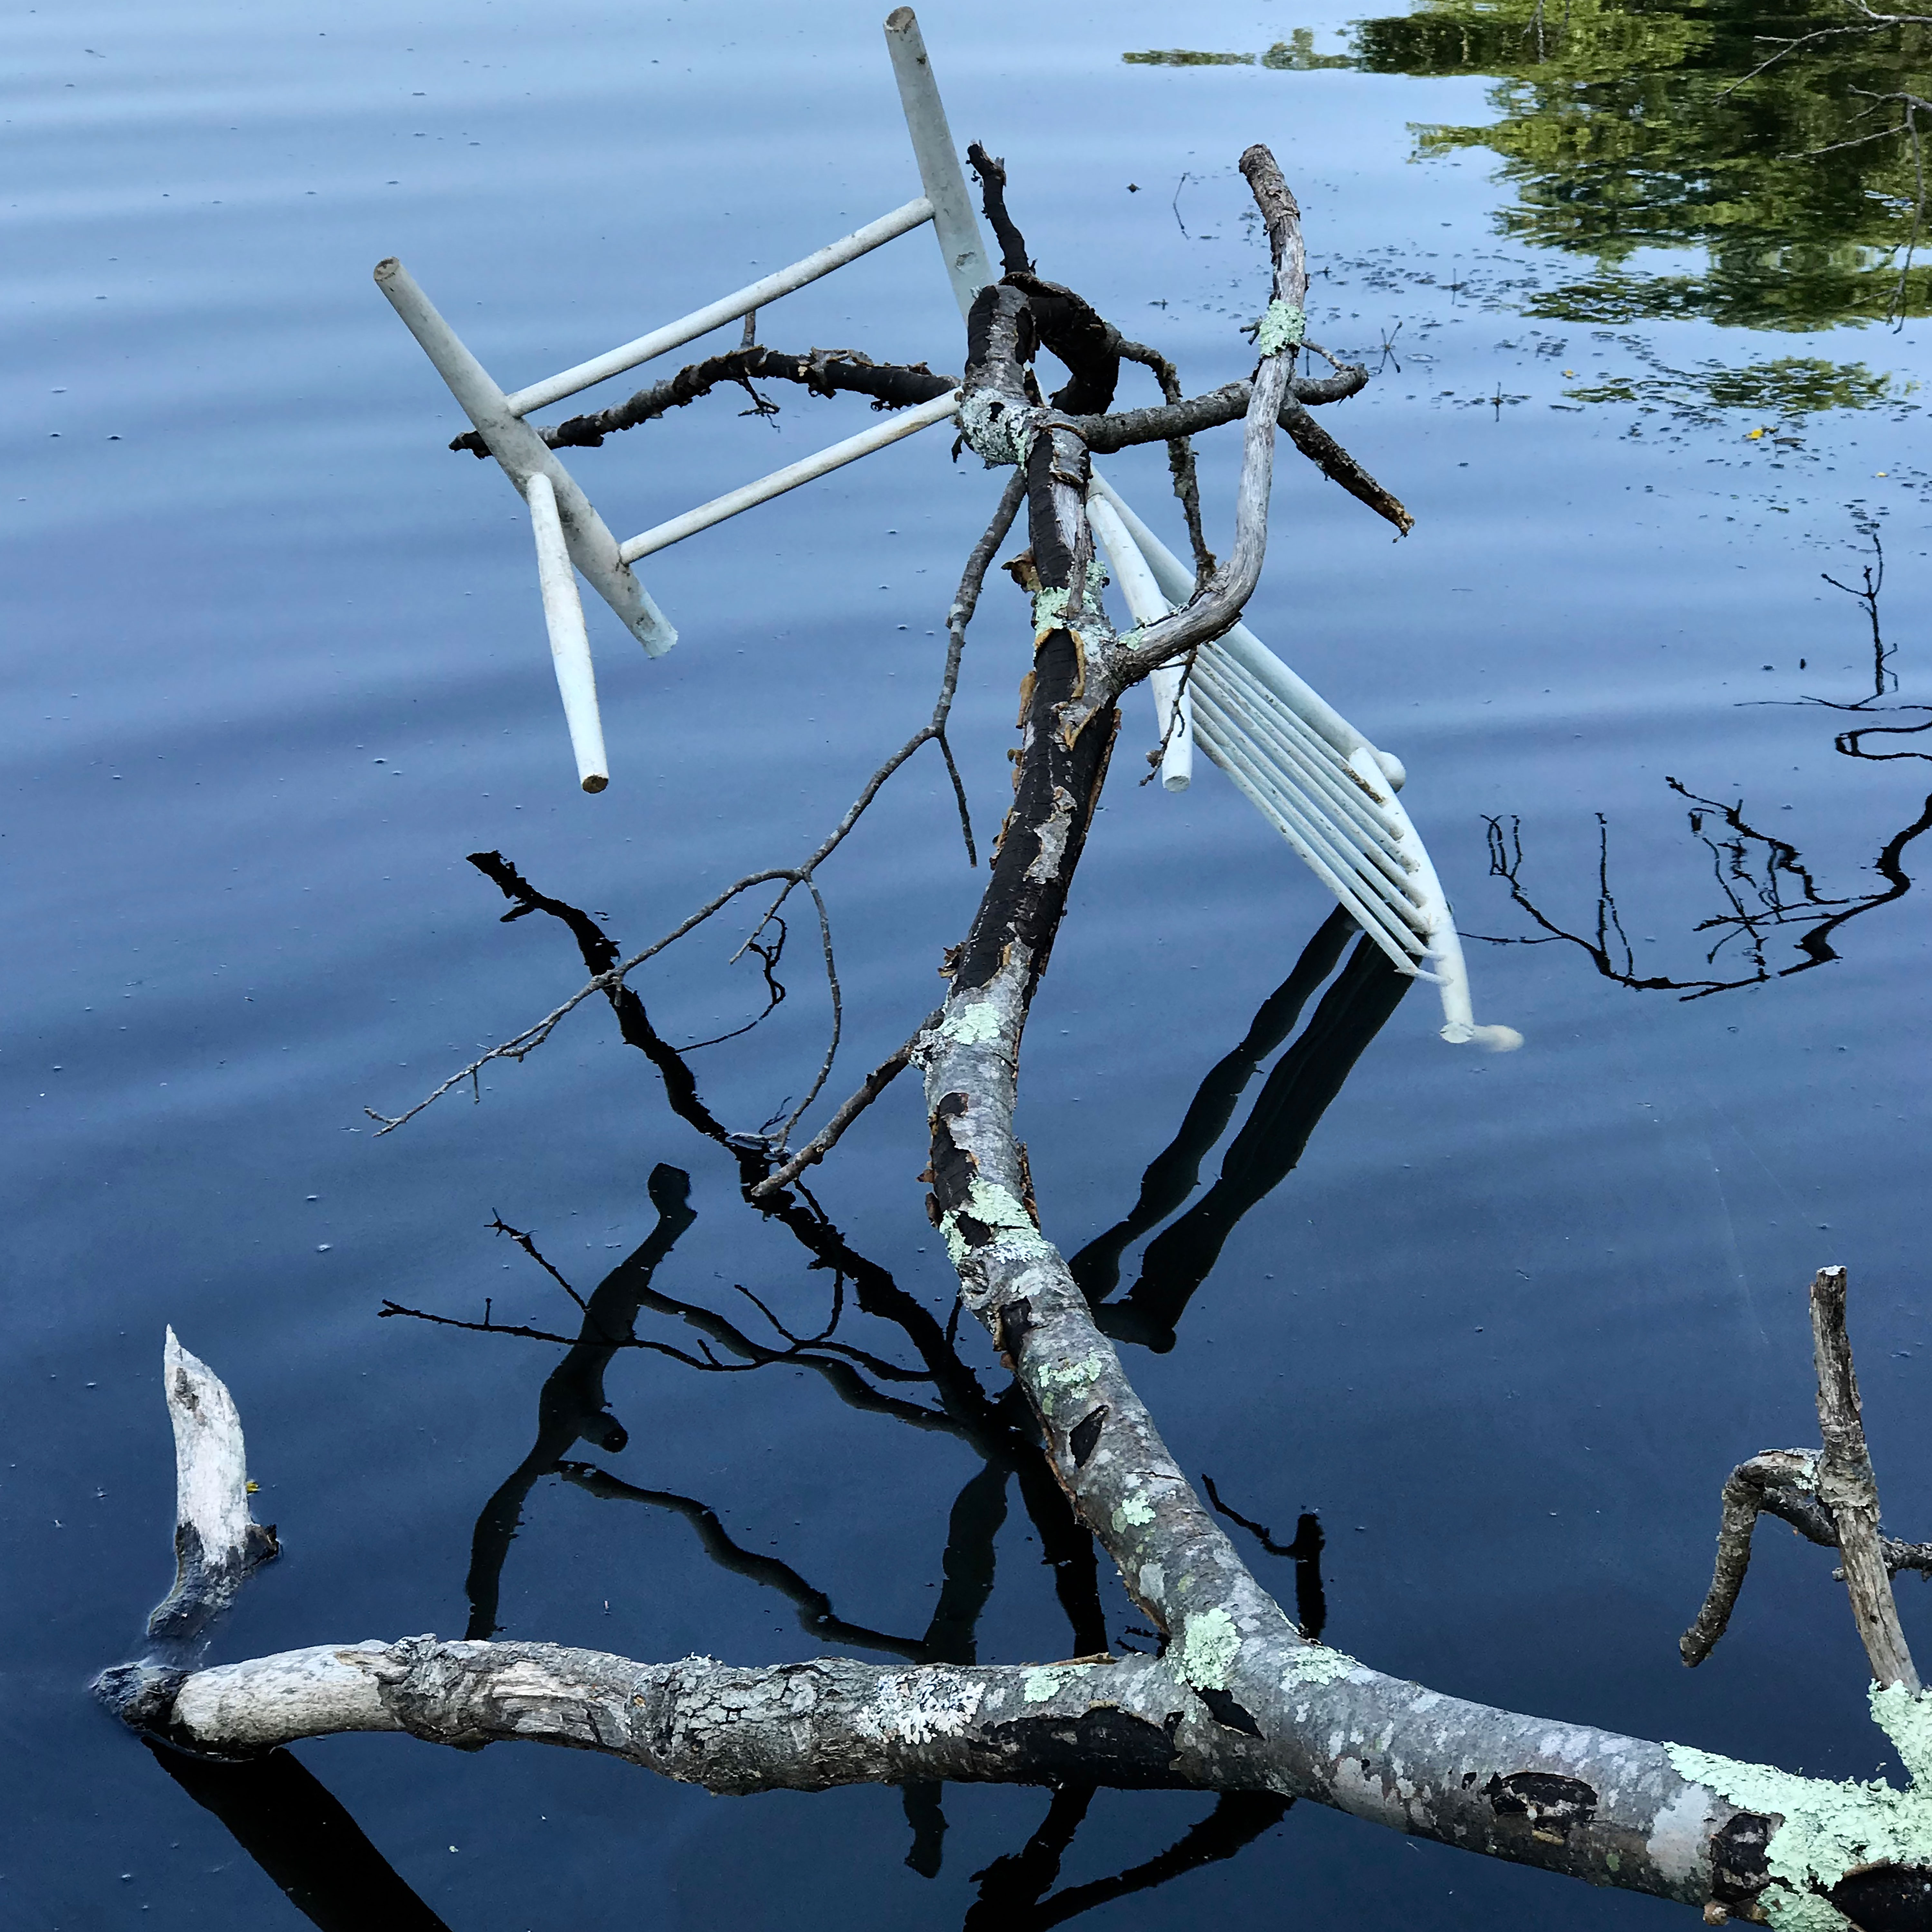 Photograph highlighting a detail of 'Metamorphic Reflections' installation by artist Caroline Coolidge, showing a branch with half of a white chair suspended upside down above the tranquil blue water of the pond.